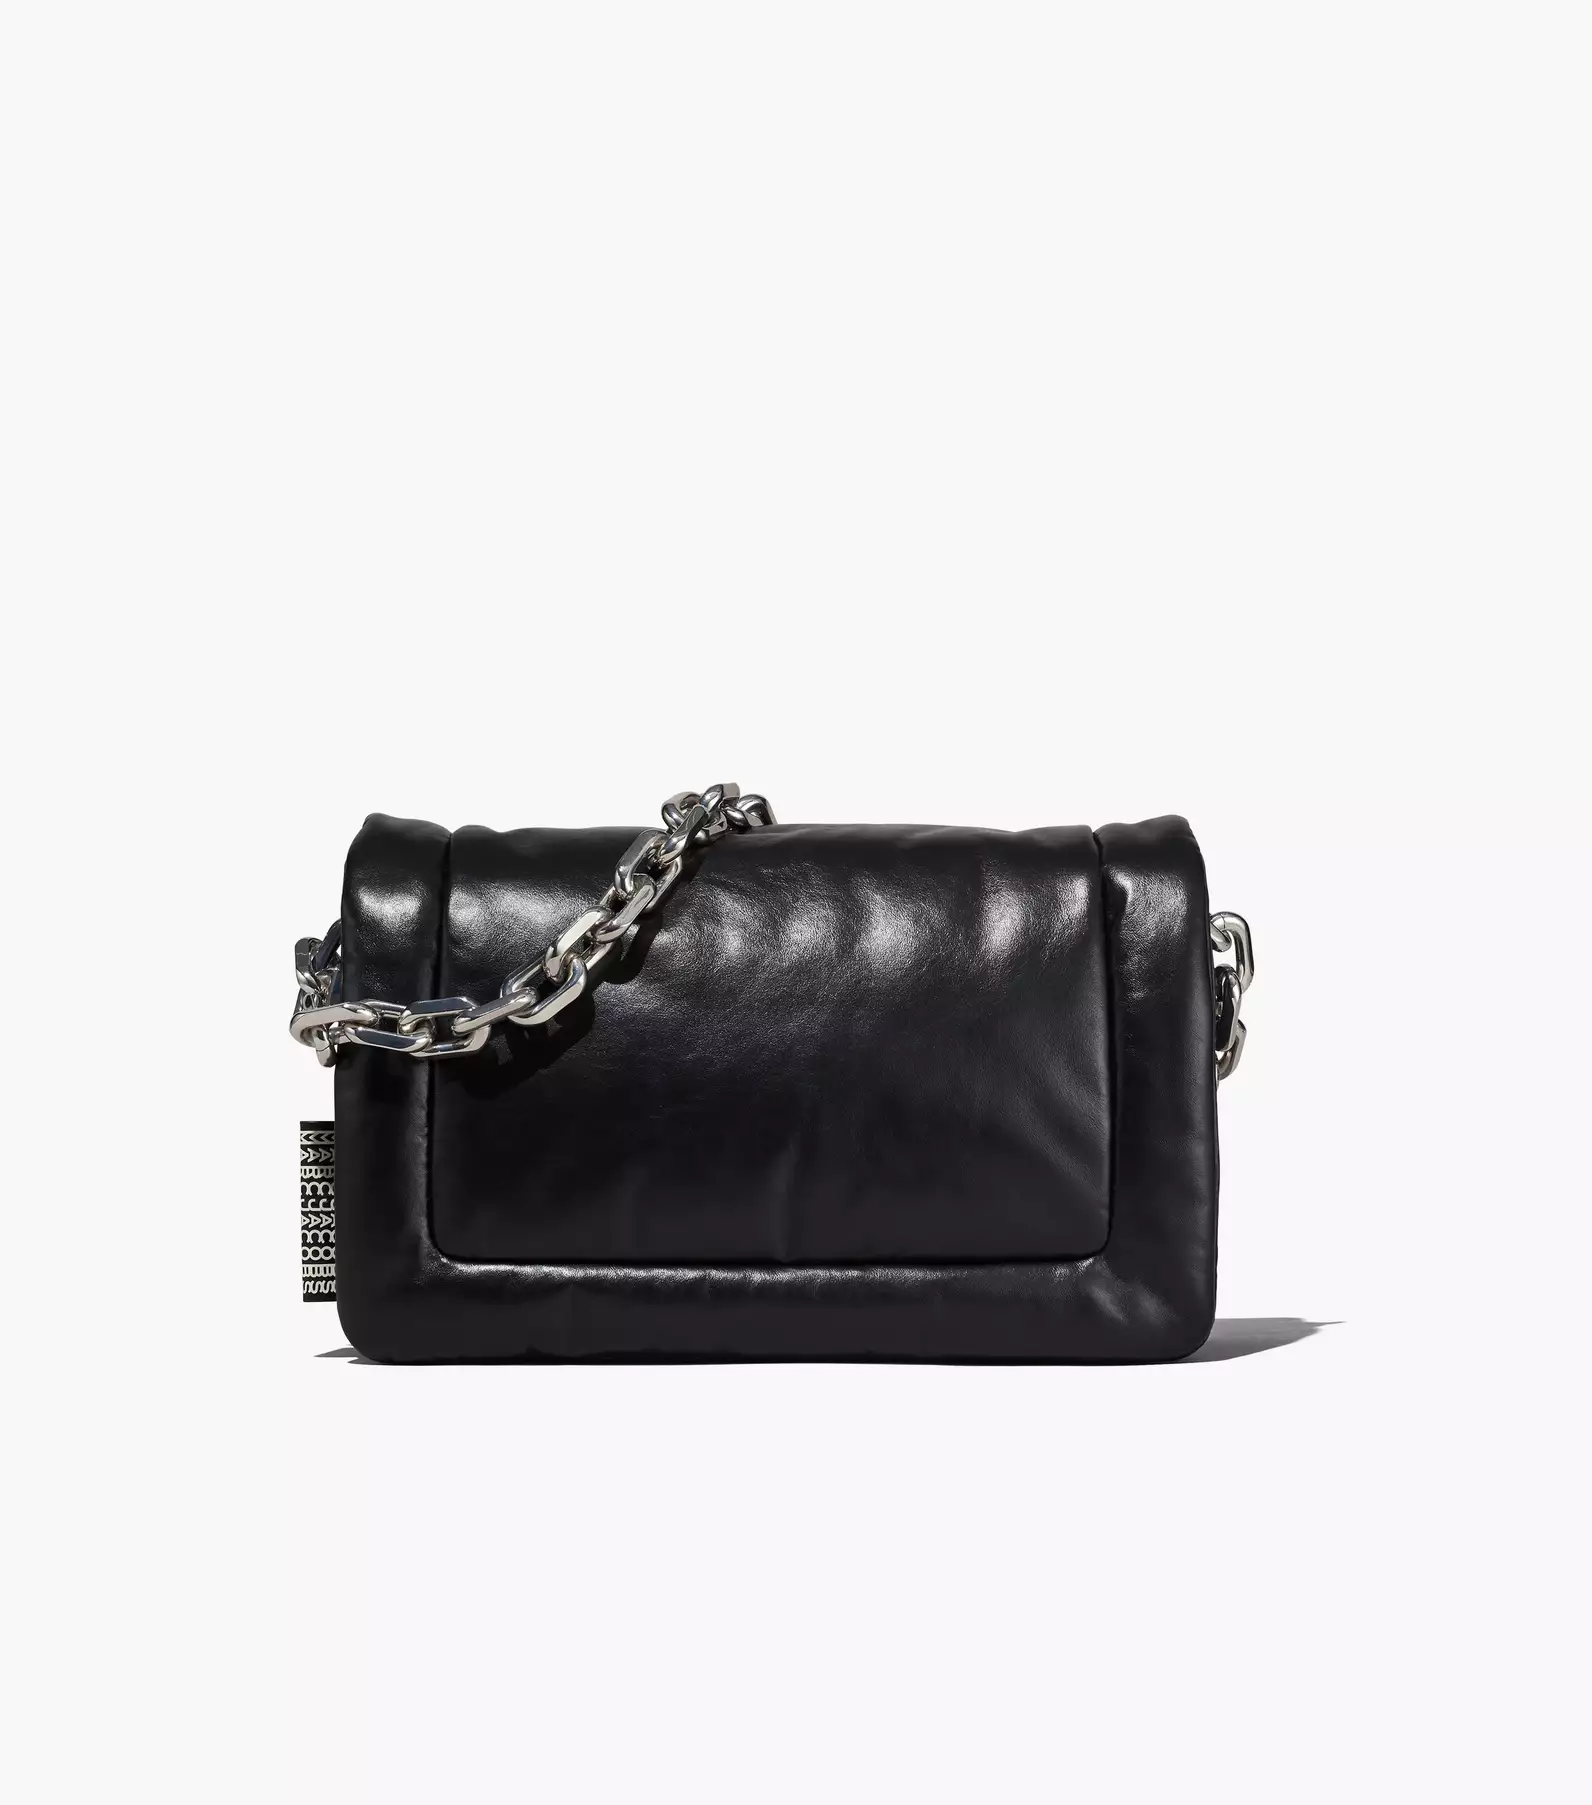 THE LEATHER PUFFY BARCODE SHOULDER BAG